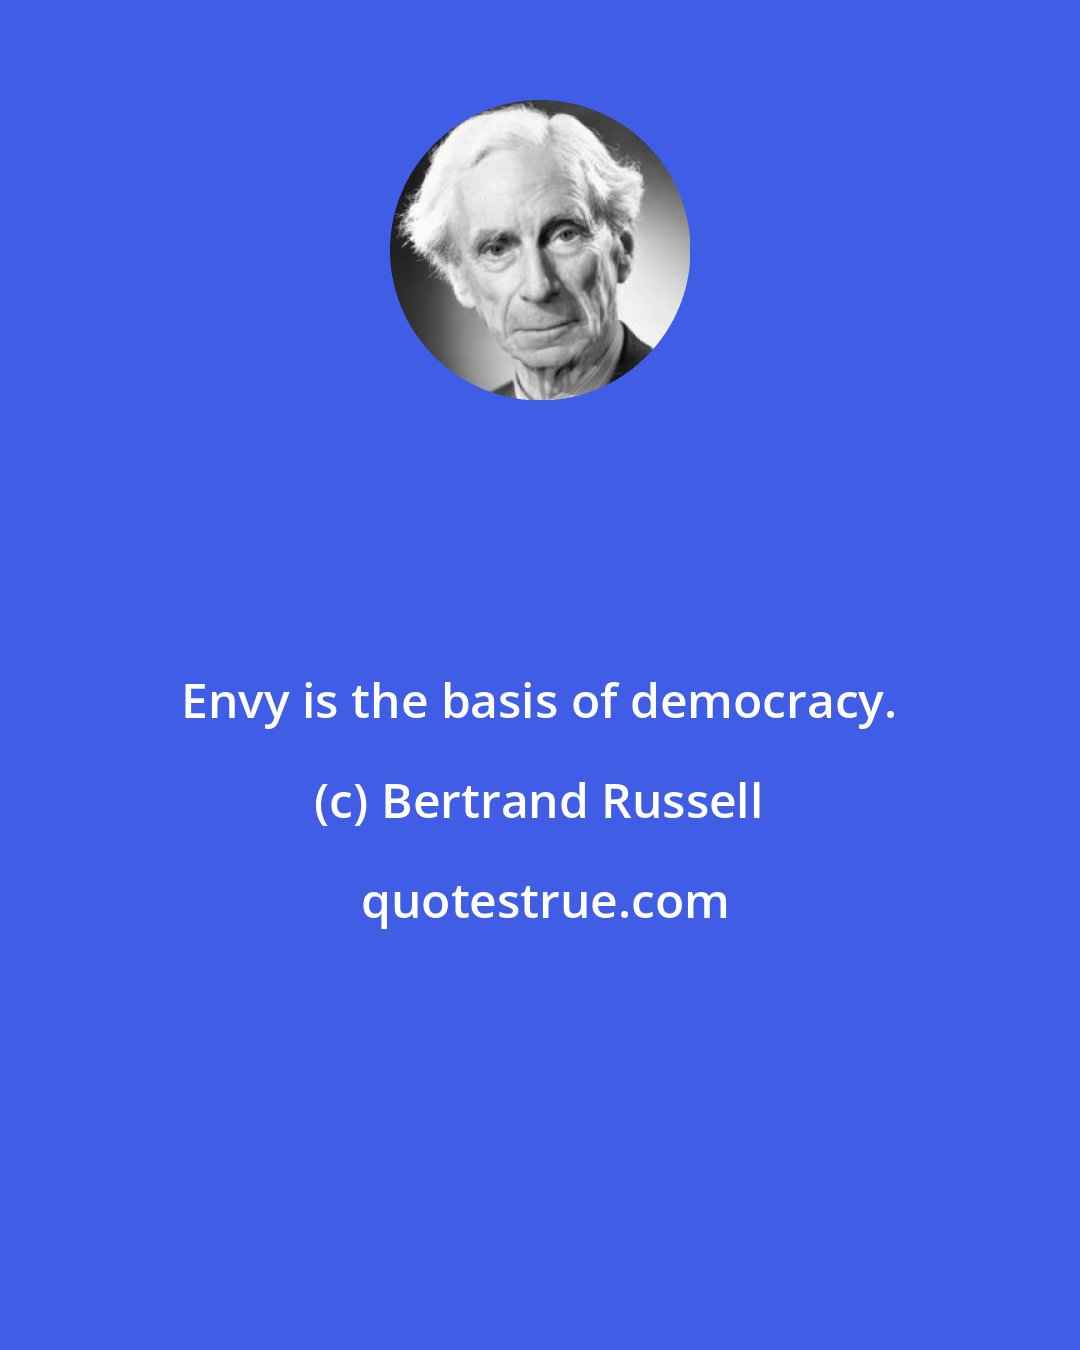 Bertrand Russell: Envy is the basis of democracy.